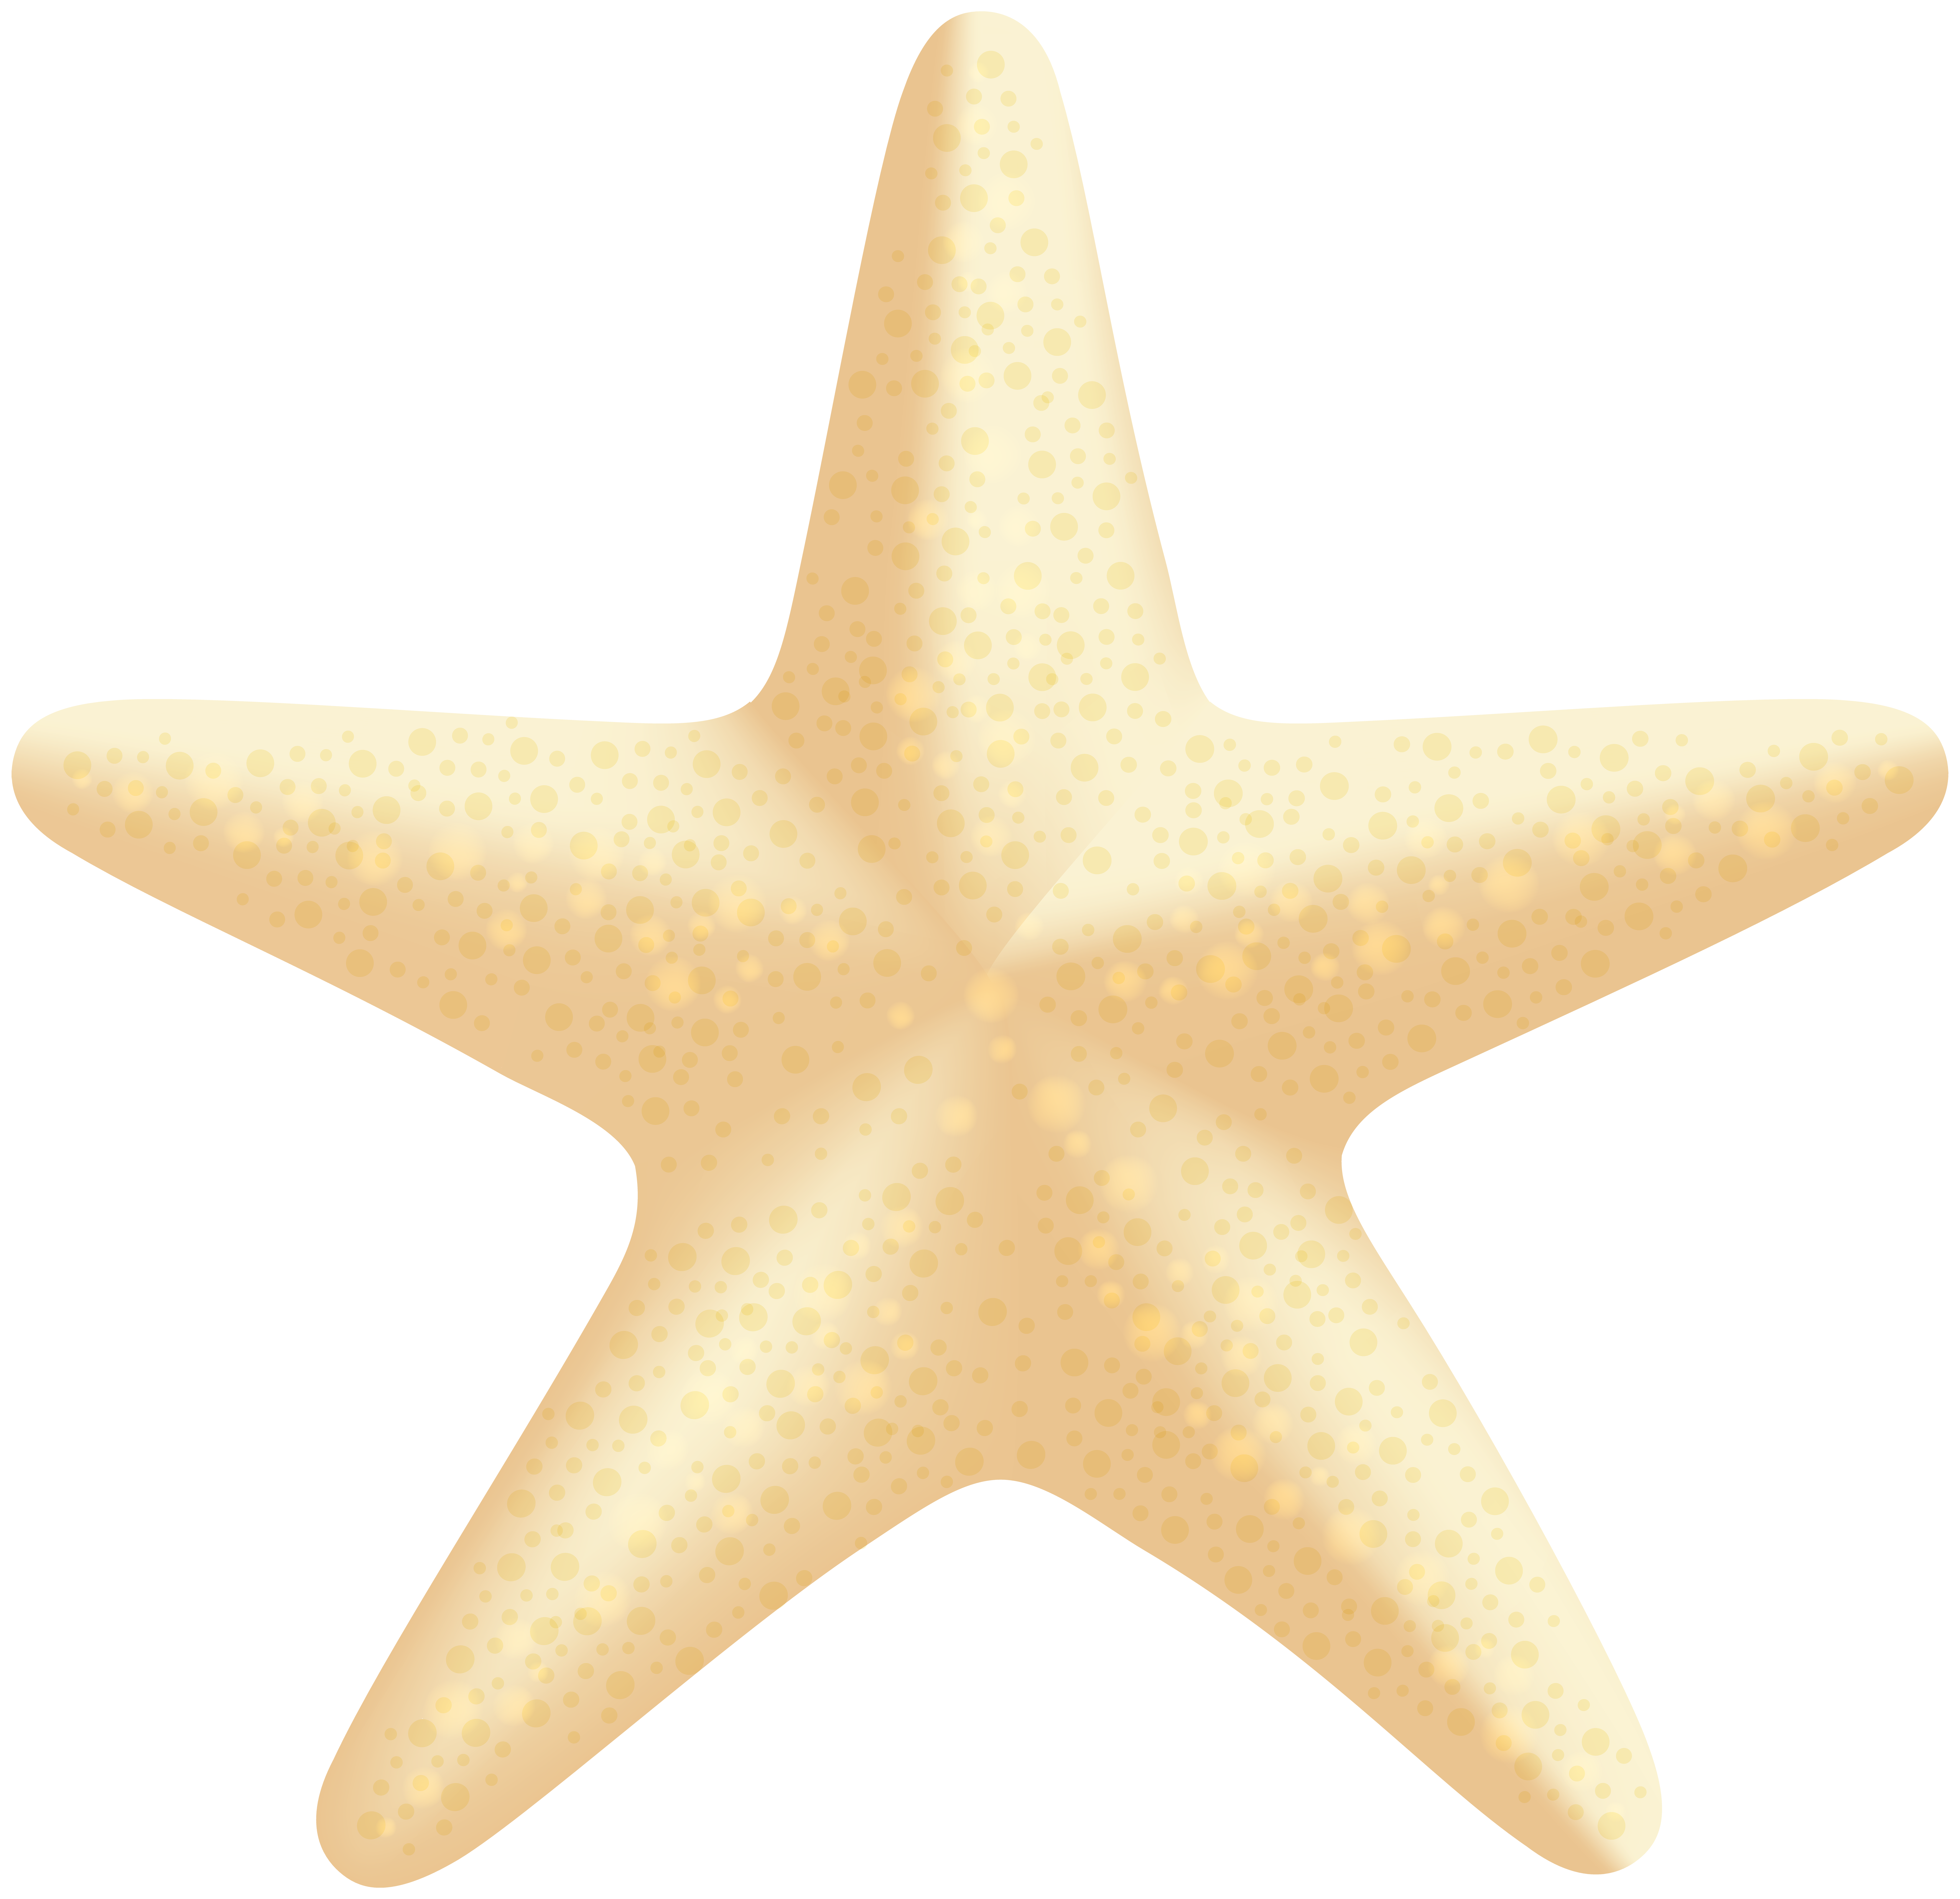 Starfish clipart free download on WebStockReview